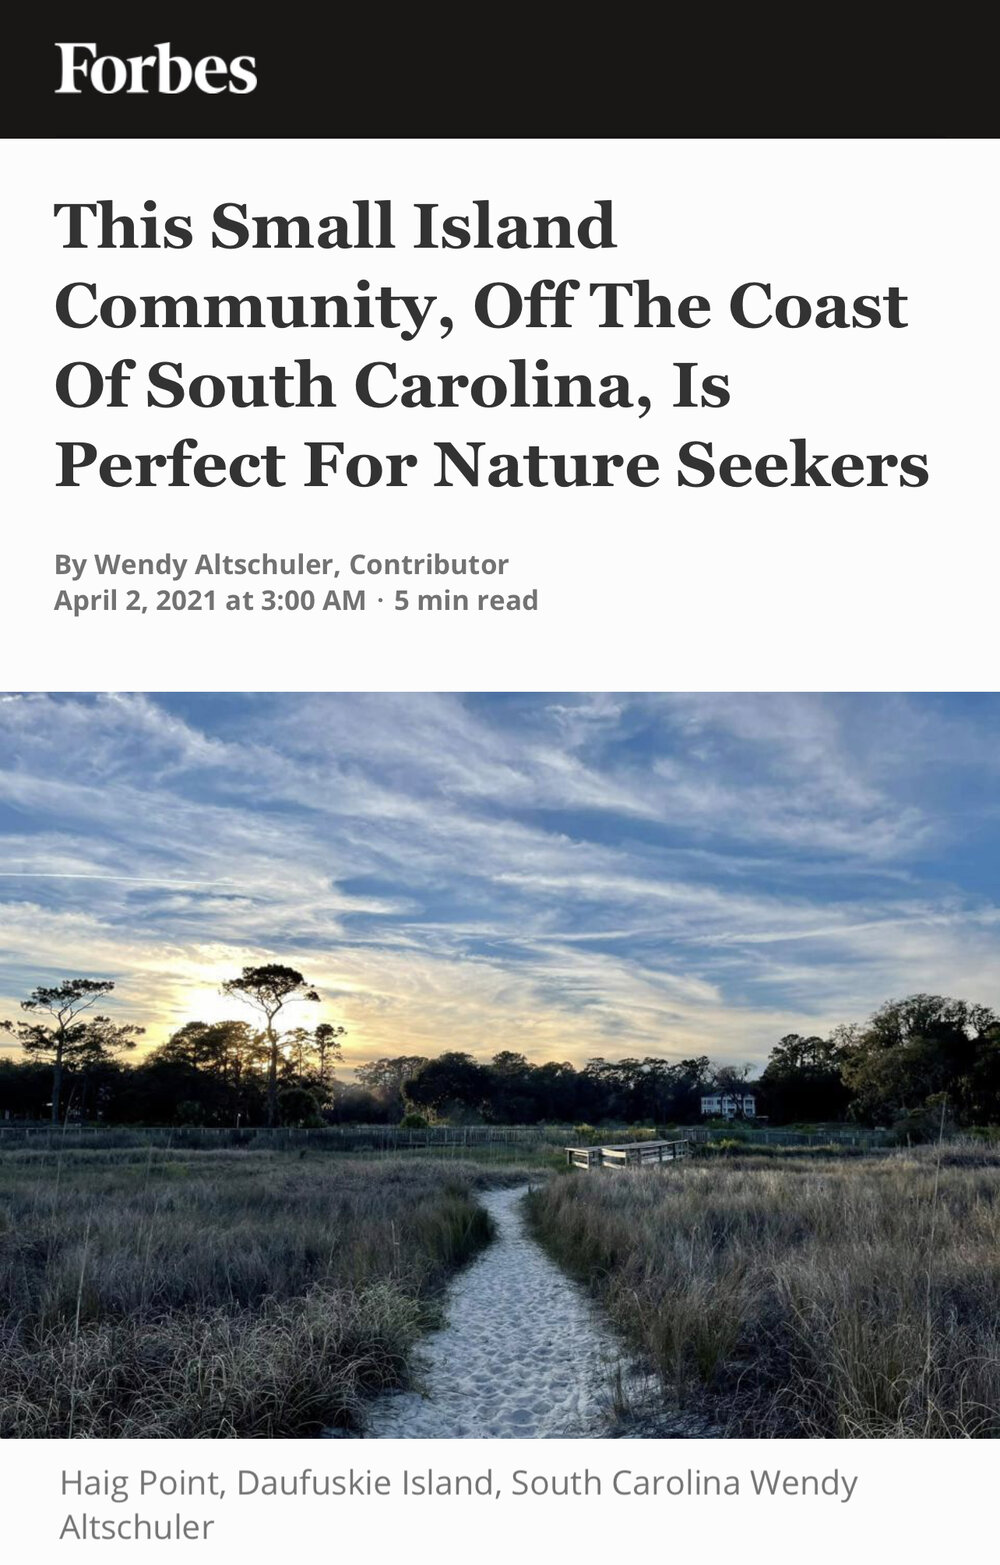 This Small Island Community, Off The Coast Of South Carolina, Is Perfect For Nature Seekers